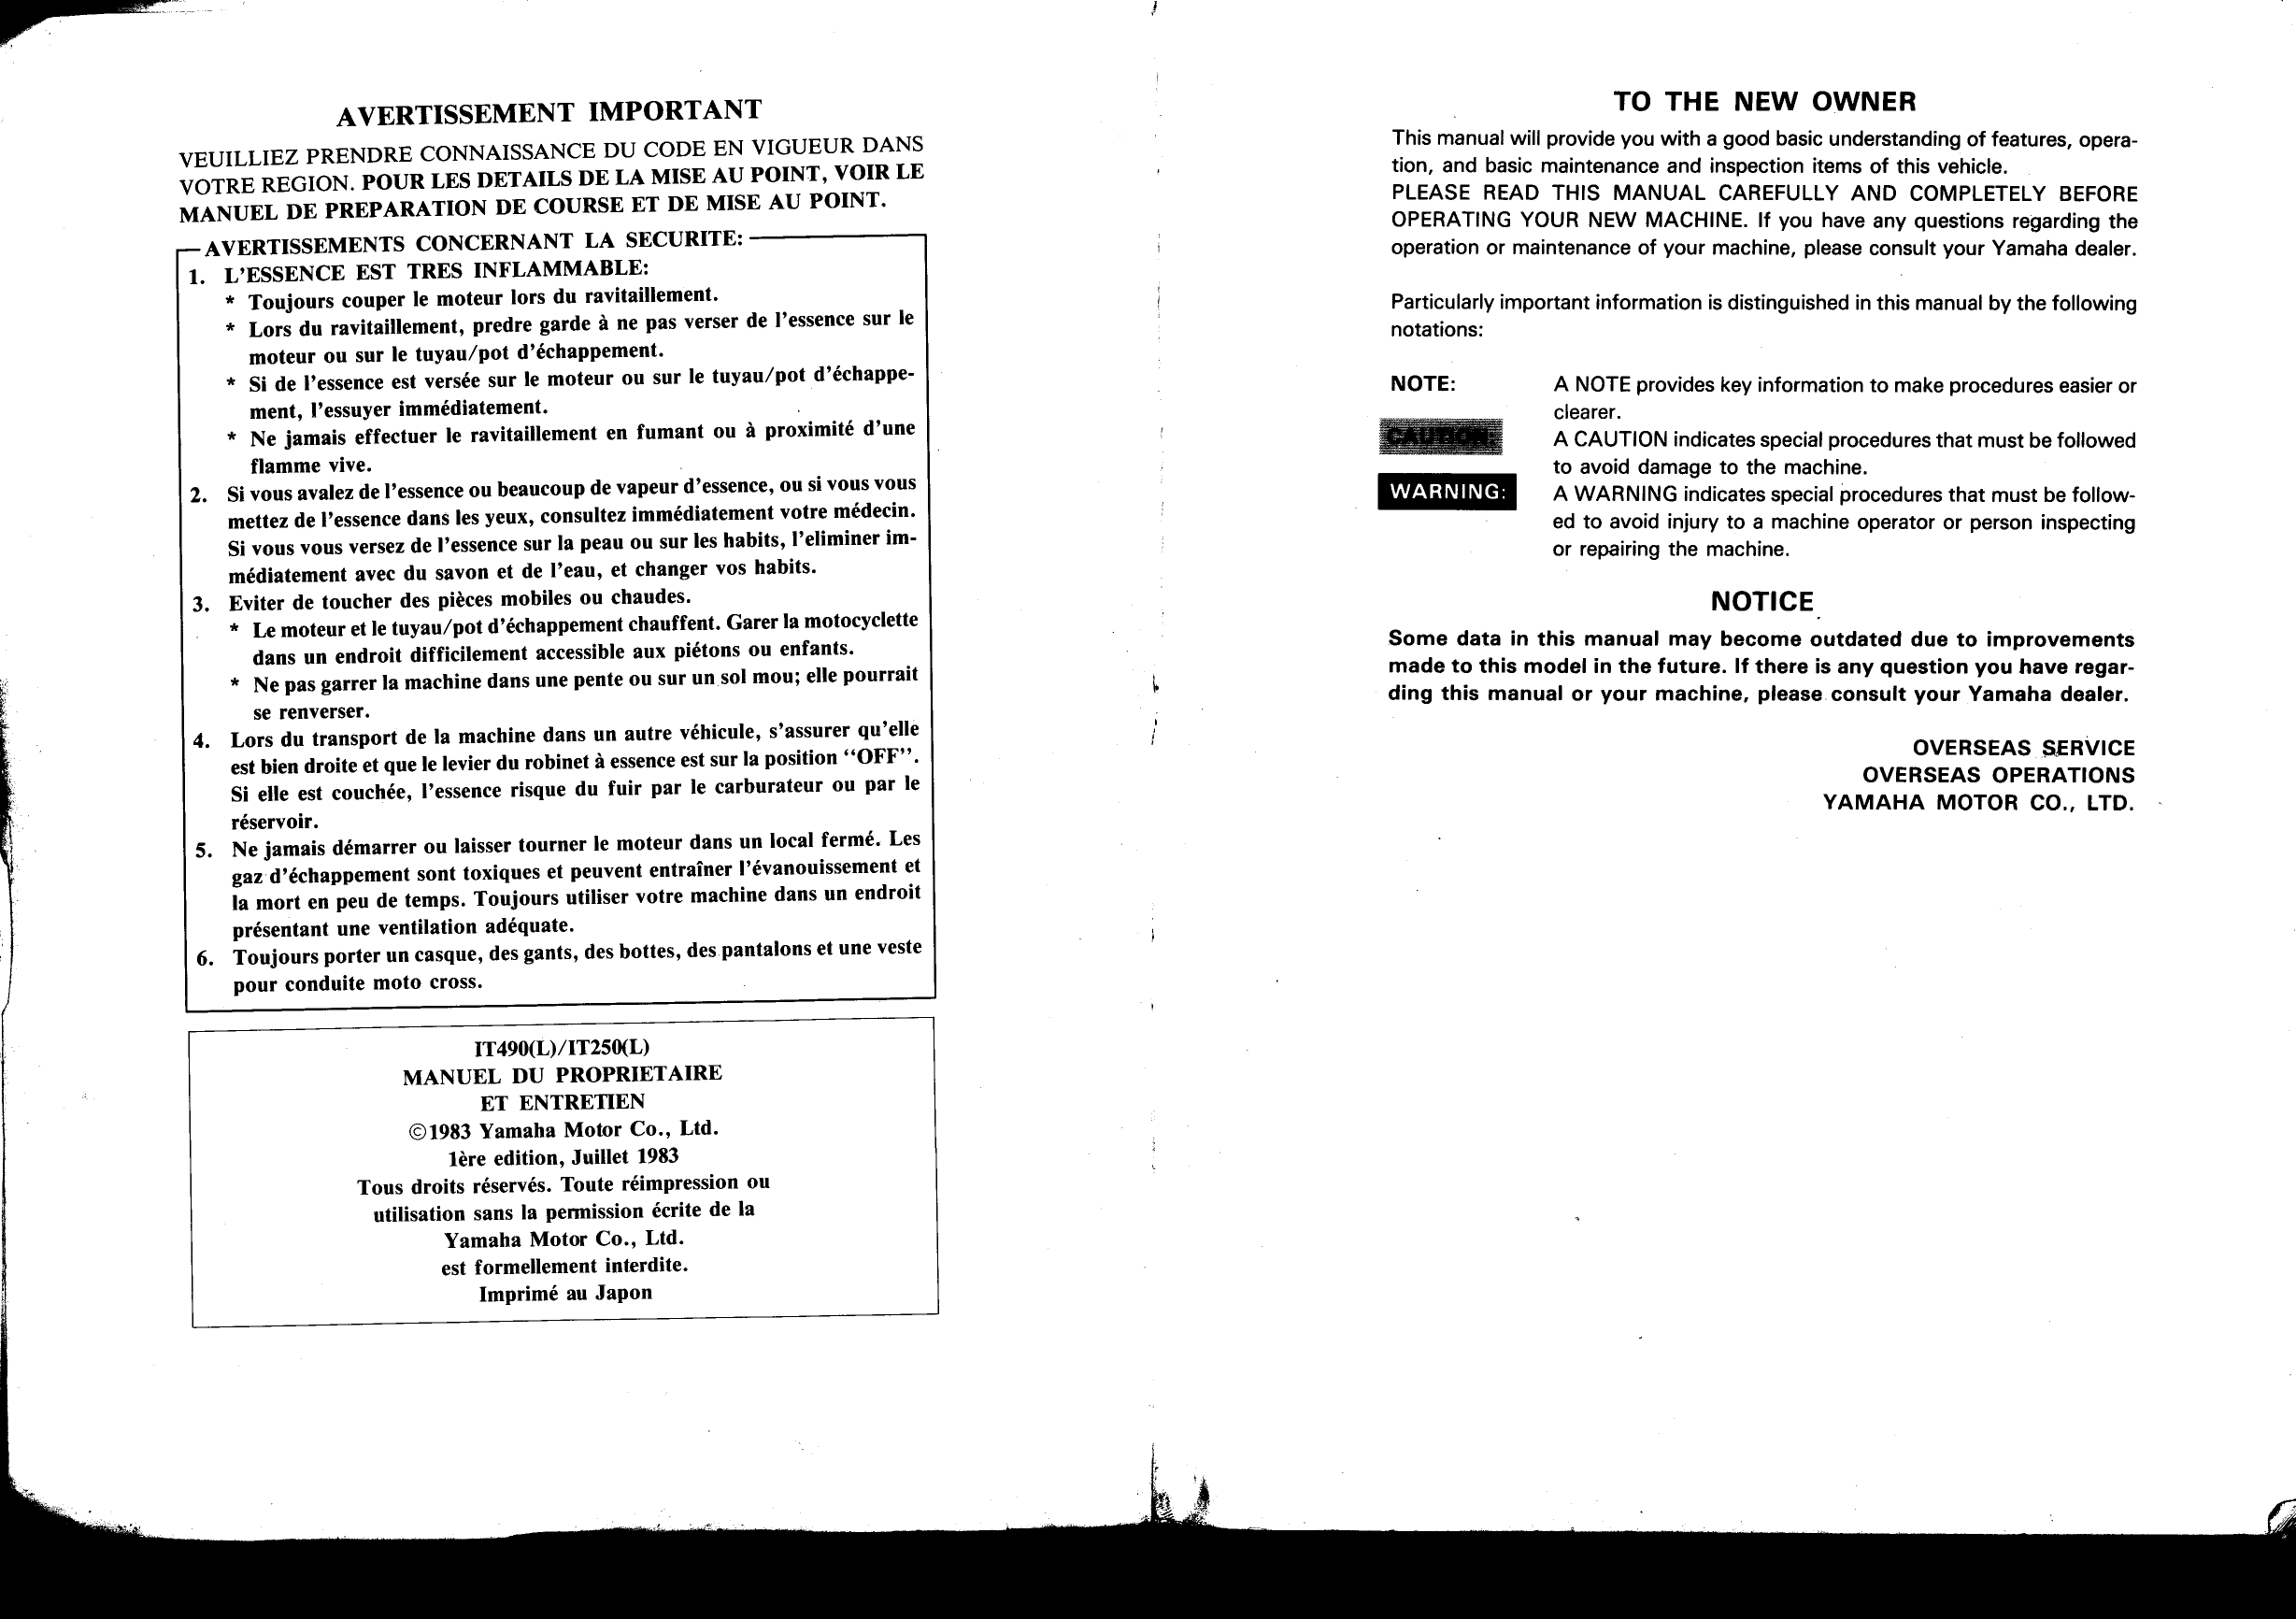 1984 Yamaha IT490(L), IT250(L) owner´s service manual Preview image 3